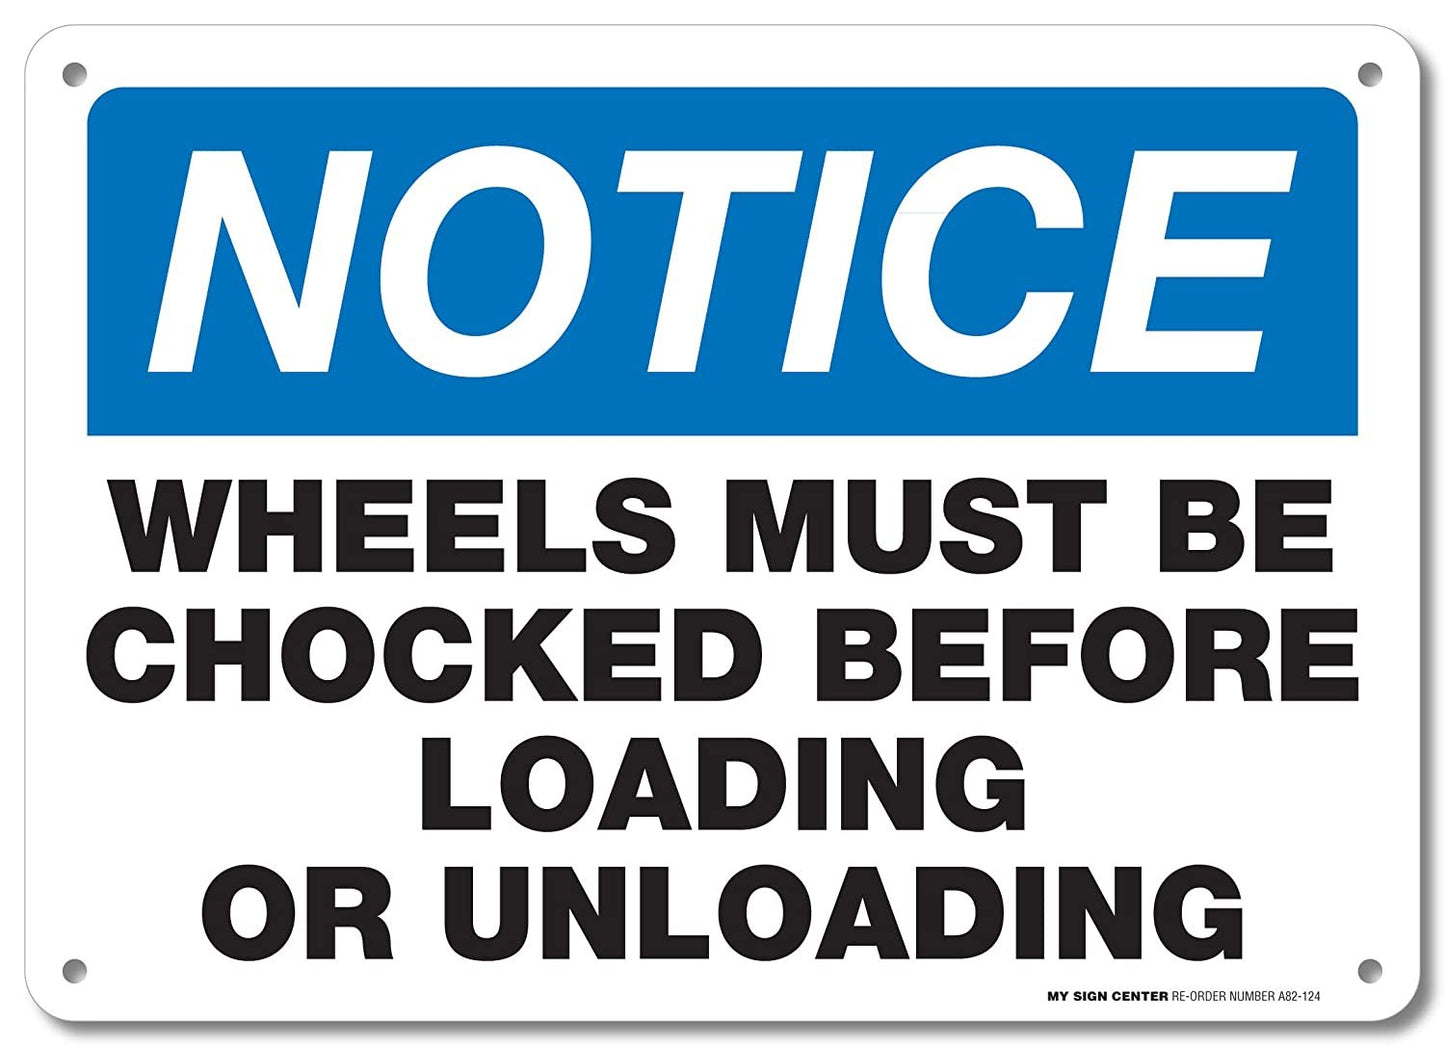 Notice Wheels Must Be Chocked Before Loading or Unloading Sign